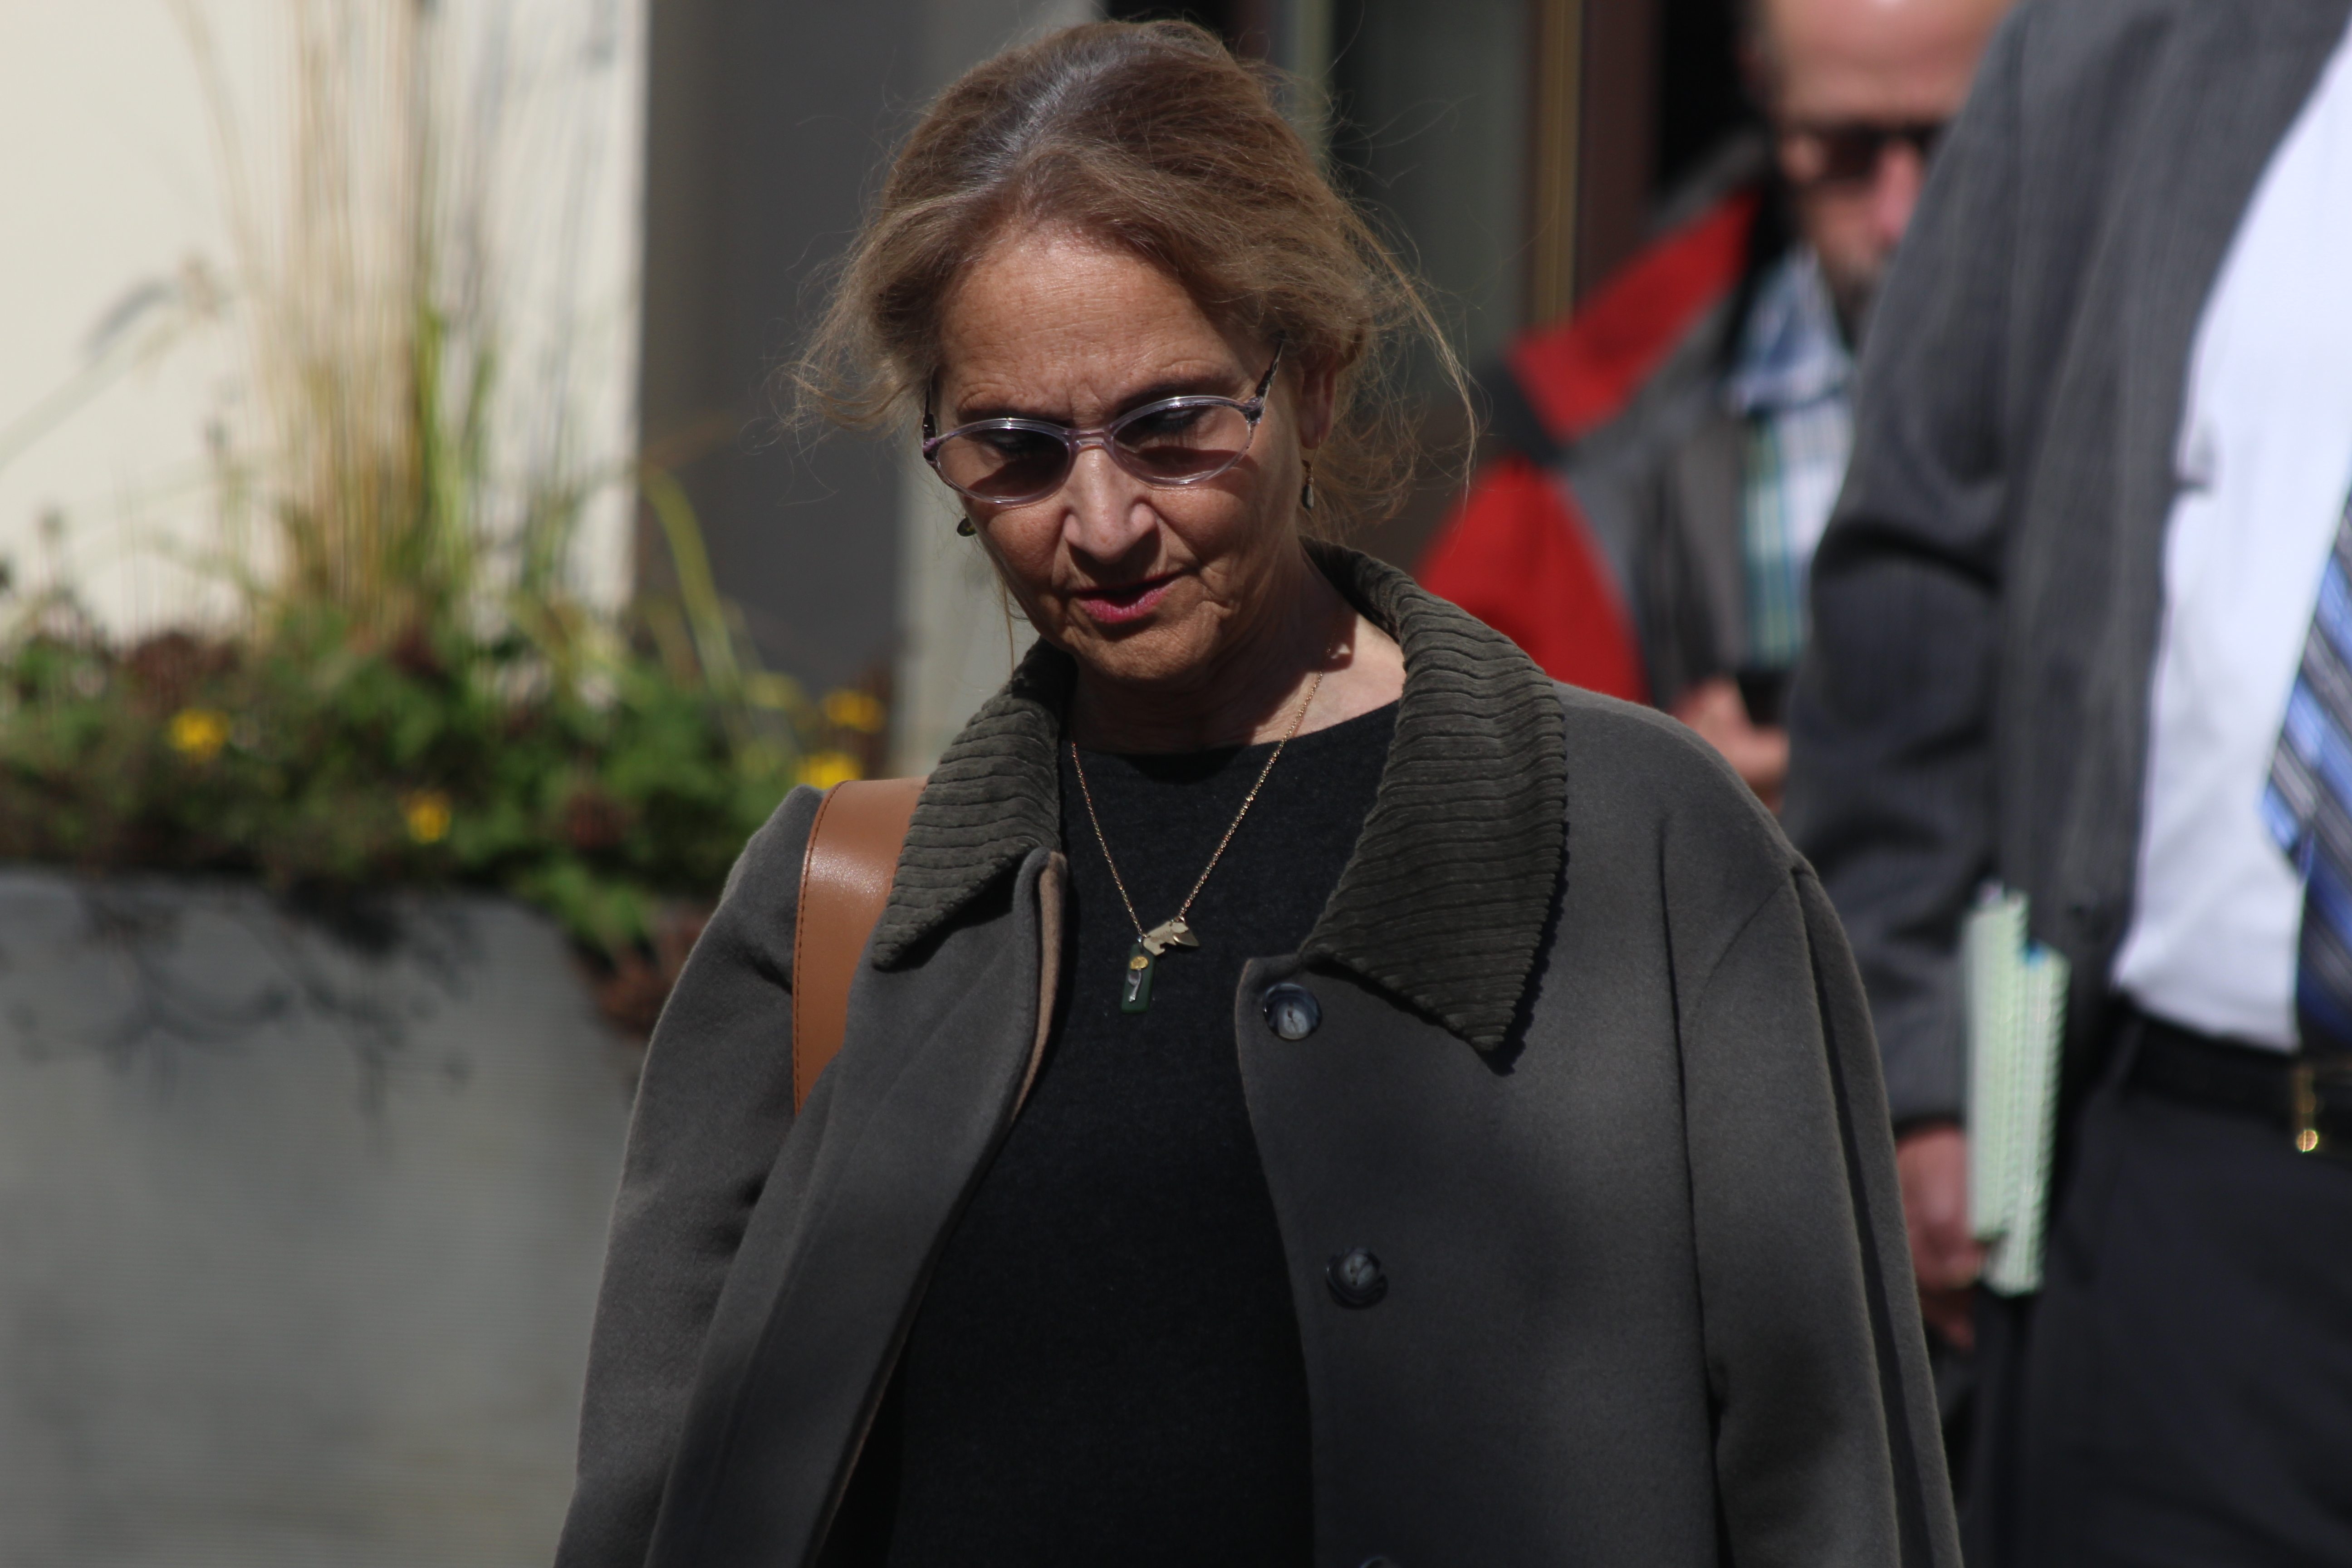 Alice Rogoff, former owner of the Alaska Dispatch News, leaves the Anchorage Federal Building following the sale of the ADN to the Binkley family. (Photo by Wesley Early/Alaska Public Media)